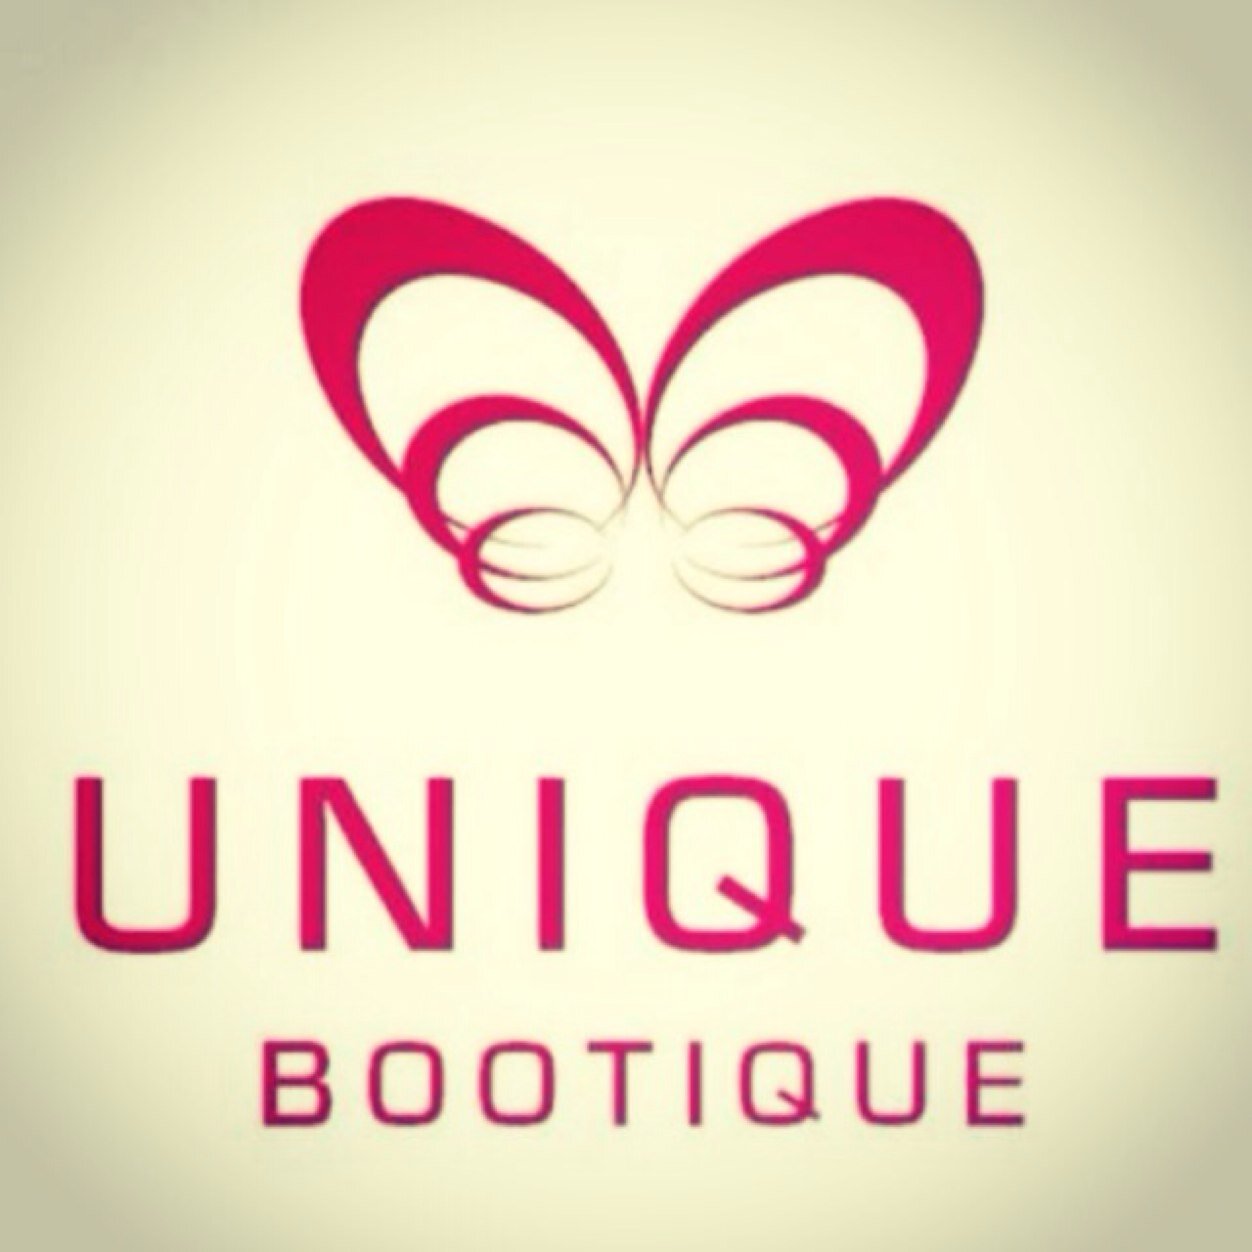 Unique Bootique is a design of jewellery and handmade gifts somethimg to suit every style and every budget ............... INSTAGRAM UNIQUE-BOOTIQUE